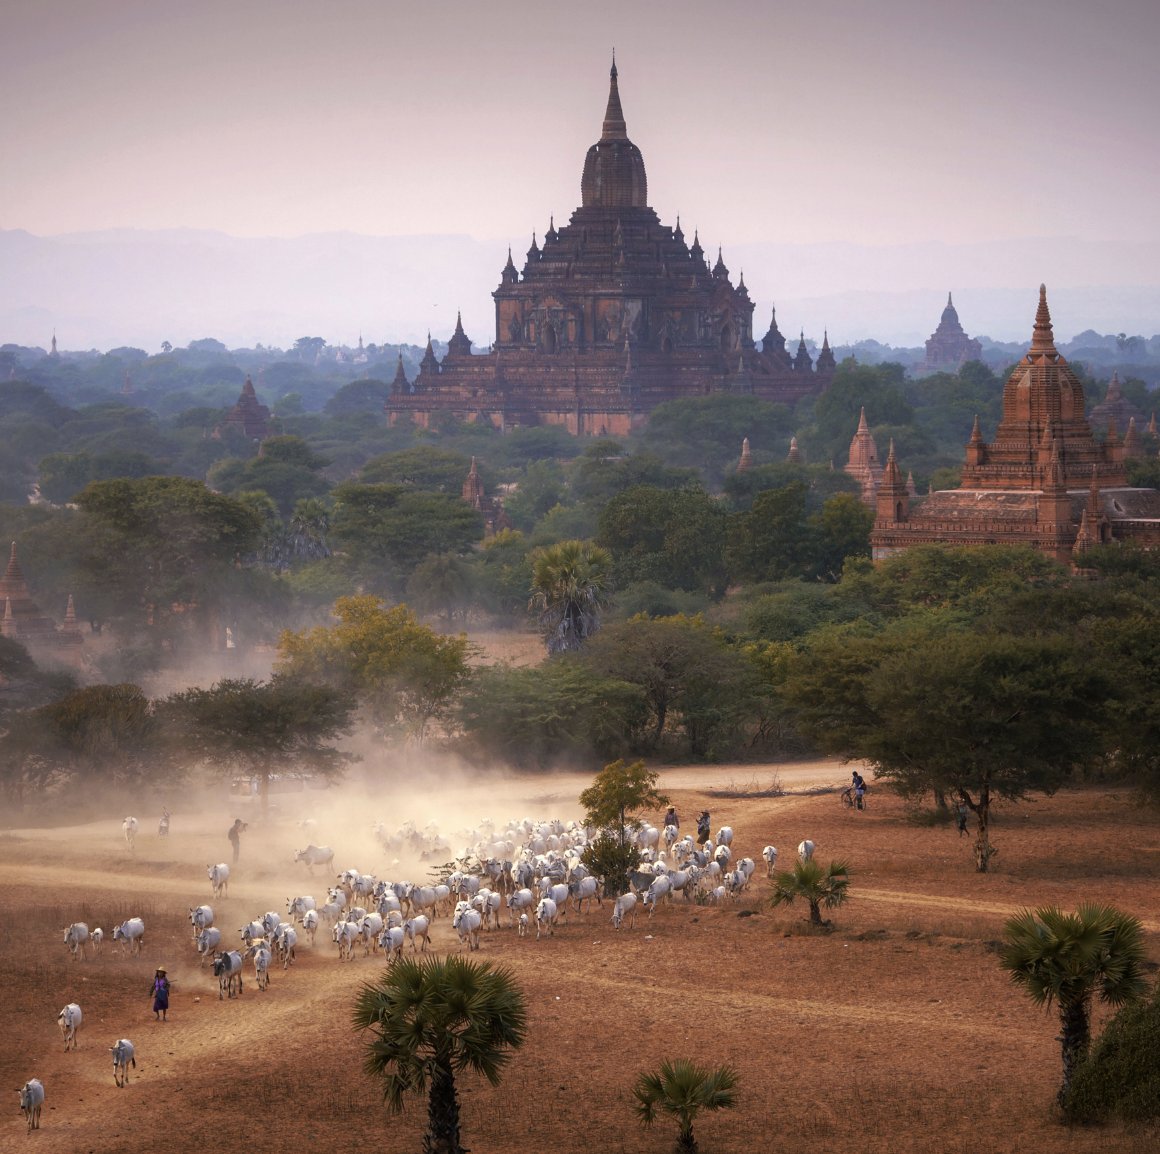 Architecture tells us a story about time, heritage & culture. 

The unique history of architecture along the #SilkRoads is reflected here through the plains of Bagan, Myanmar. 

Capture your best photo & enter the #UNESCOSilkRoads Photo Contest! unescosilkroadphotocontest.org